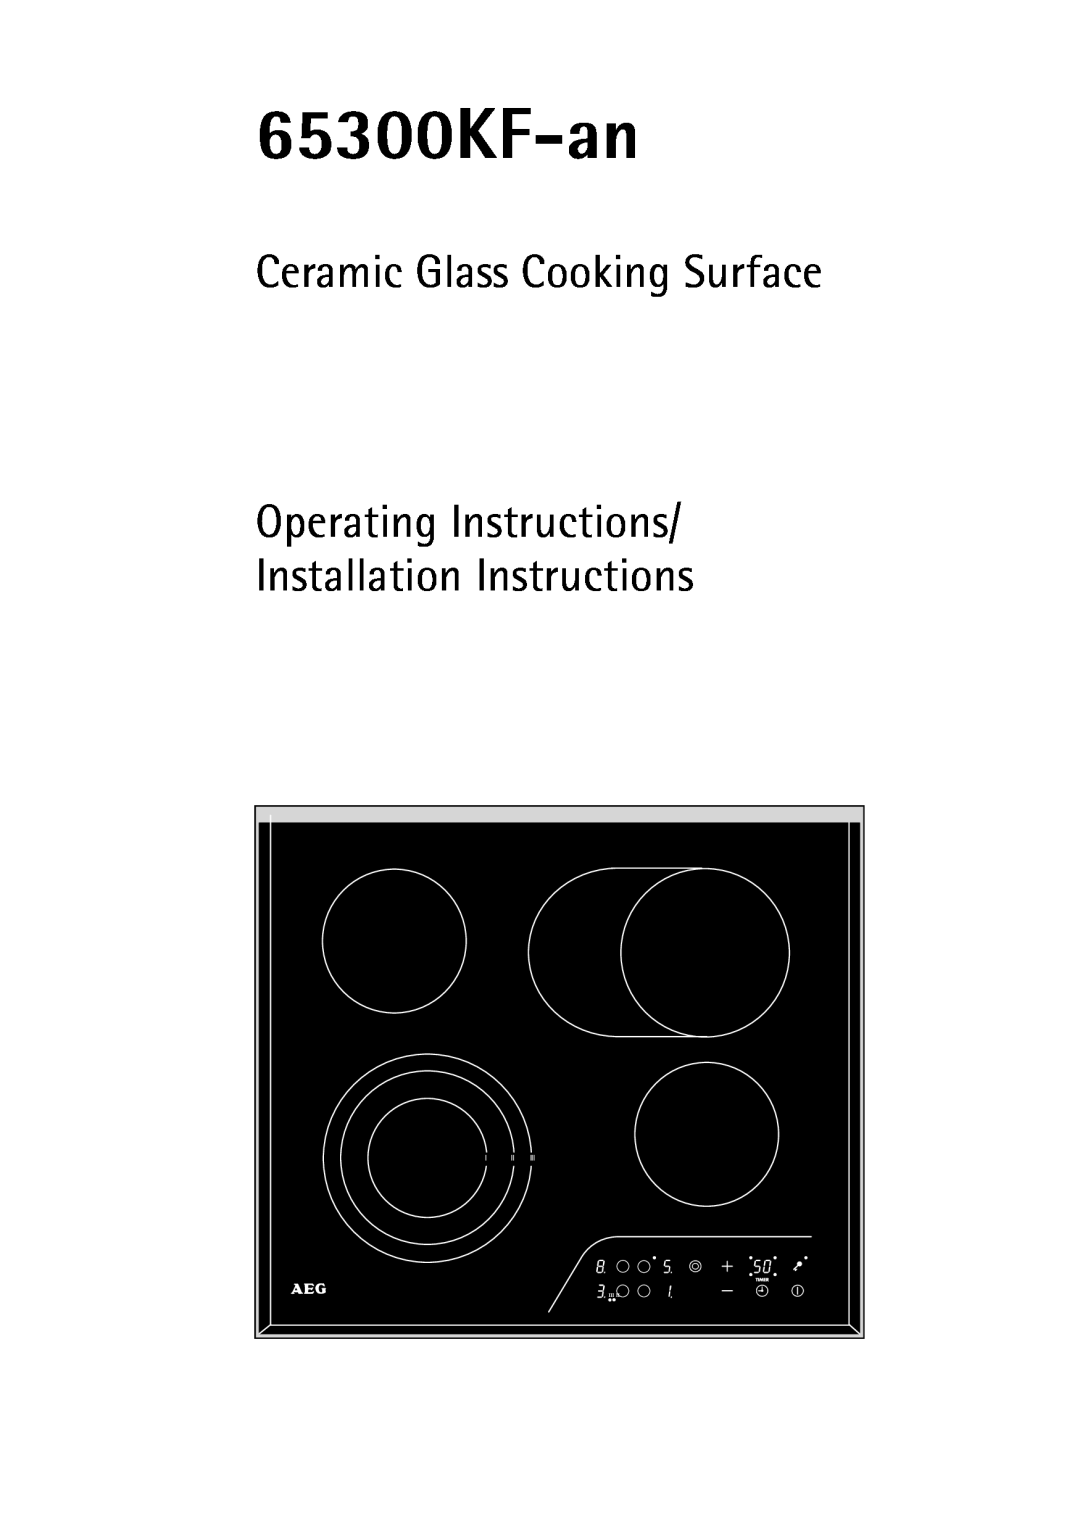 Electrolux 65300KF-an operating instructions Ceramic Glass Cooking Surface 